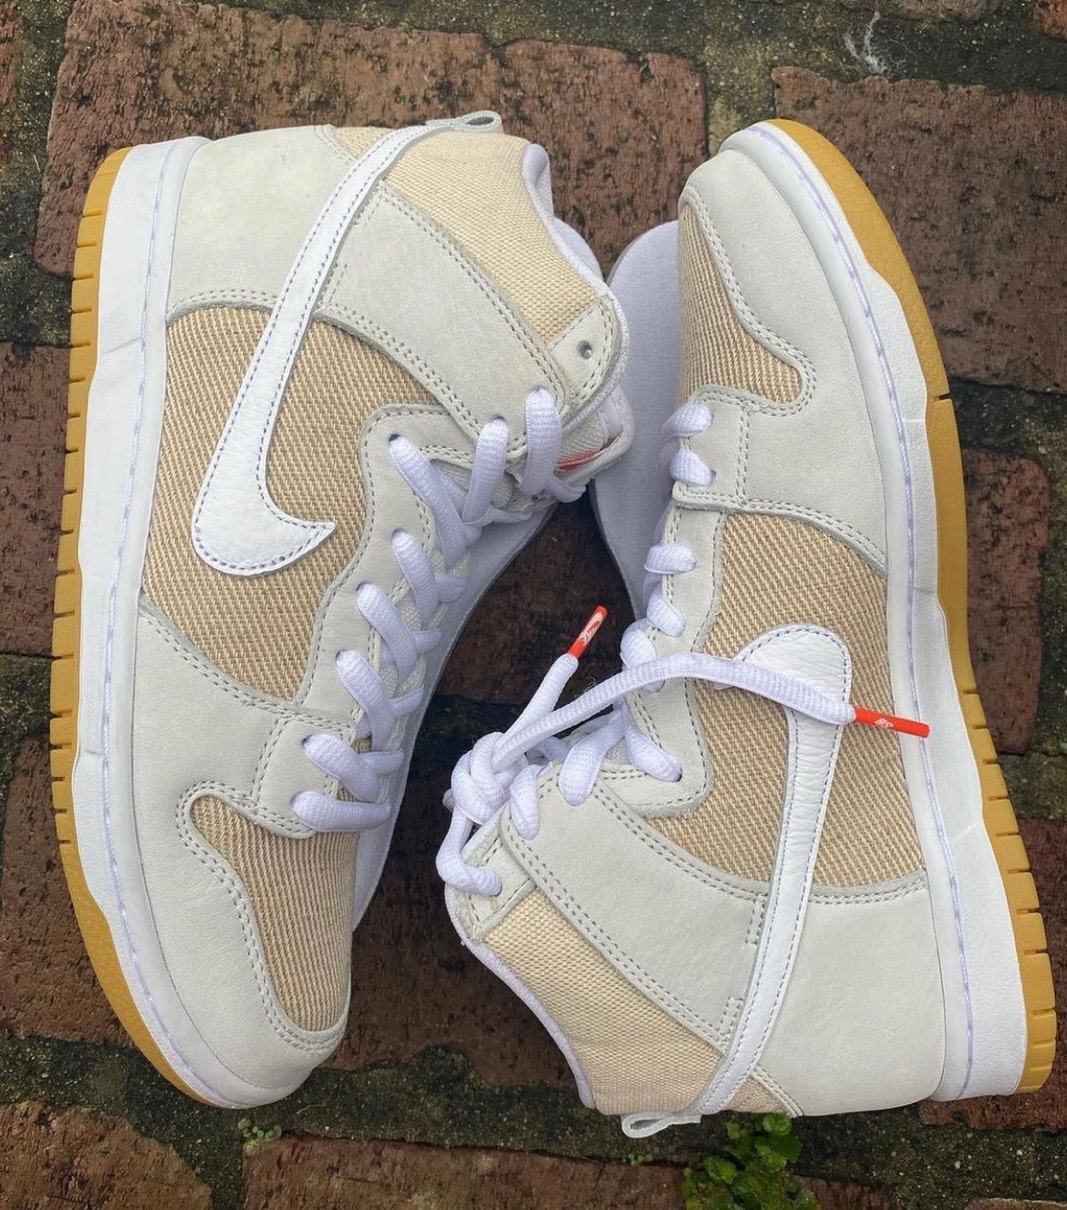 Nike SB】Dunk High Pro ISO “Unbleached Pack” Sailが国内9月4日に